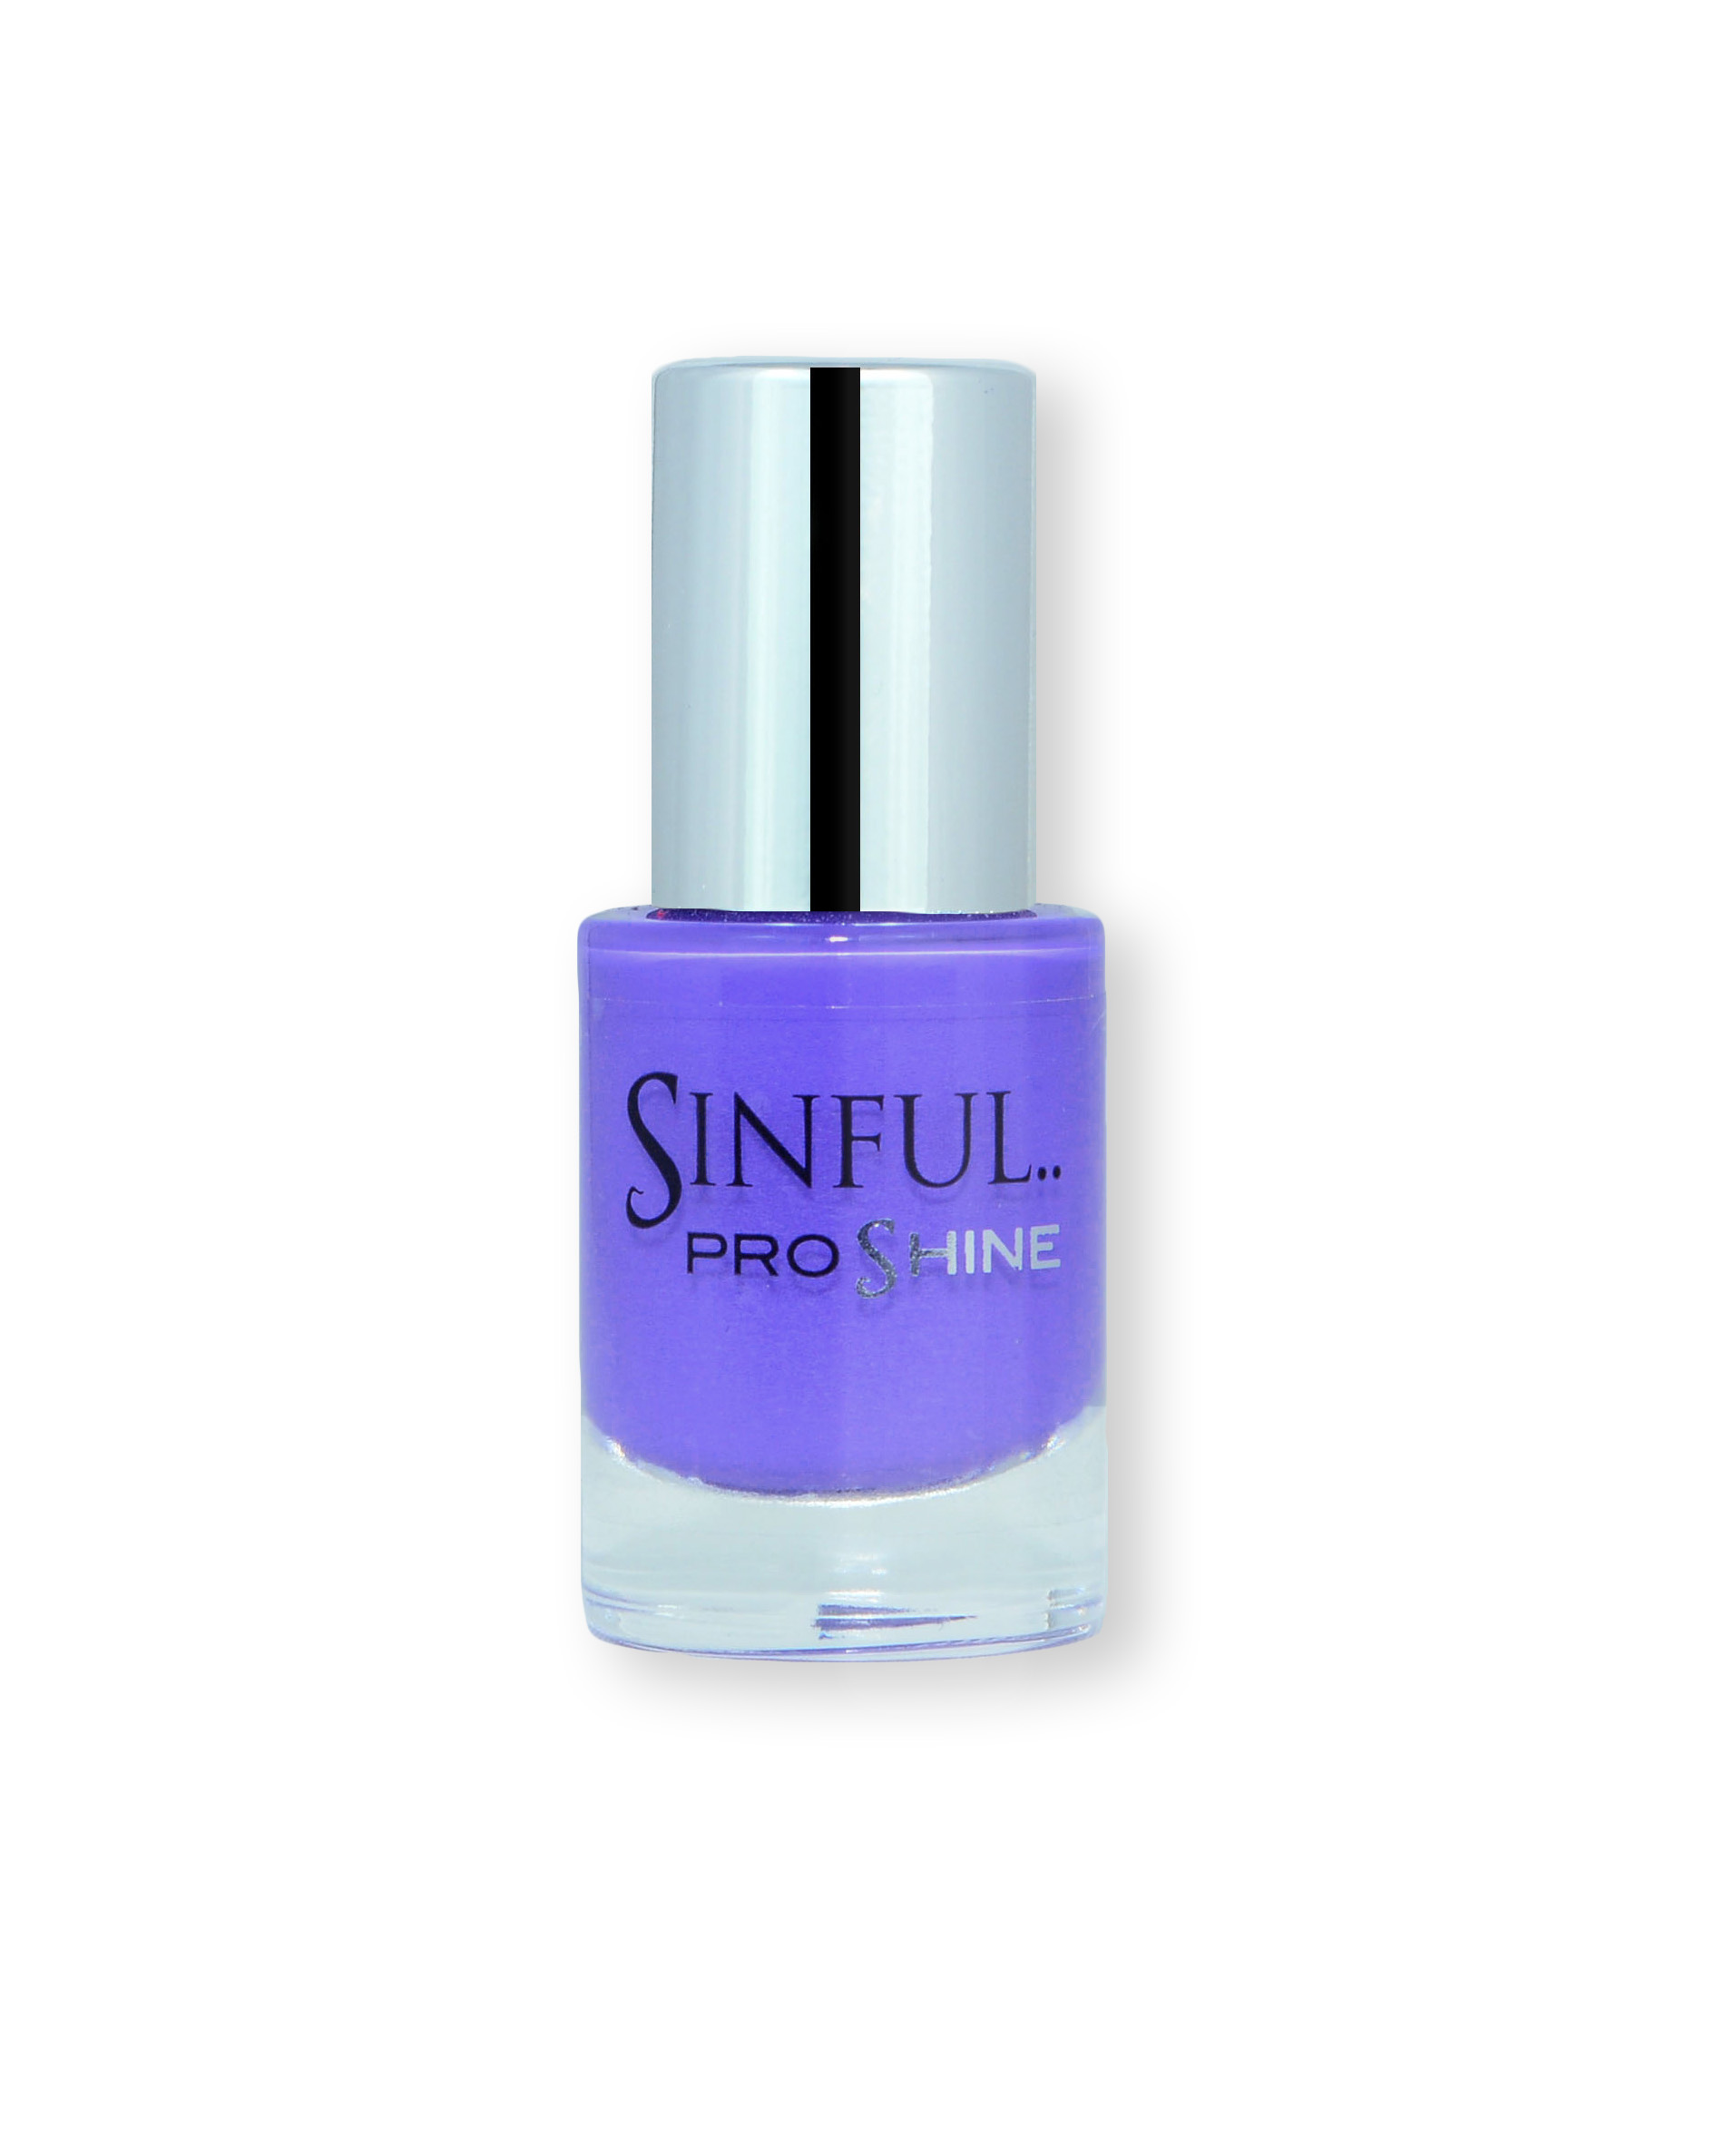 Sinful PROshine is a revolution into top spec imitation gel-like formula, easy application, full coverage and a sleek finish. Spoil yourself with the choice of 42 shades, expertly formulated with the finest grade of pigments. Cougar: Vibrant purple with a rich creme finish